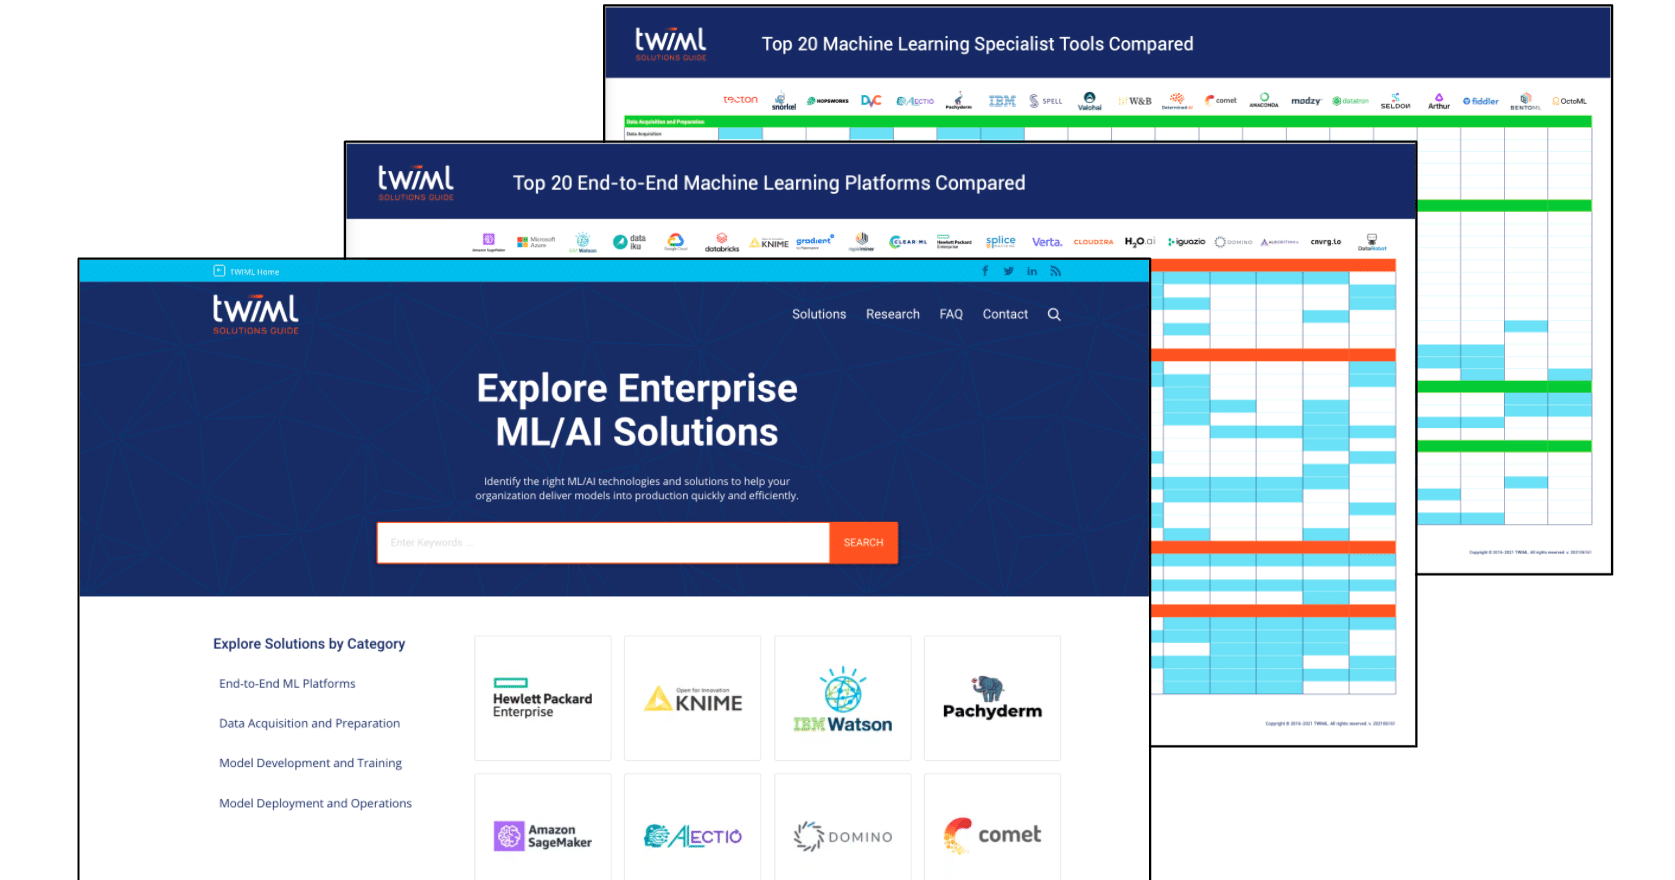 We’re proud to announce the new TWIML Solutions Guide, a directory of machine learning tools and platform technologies for data scientists, ML engin